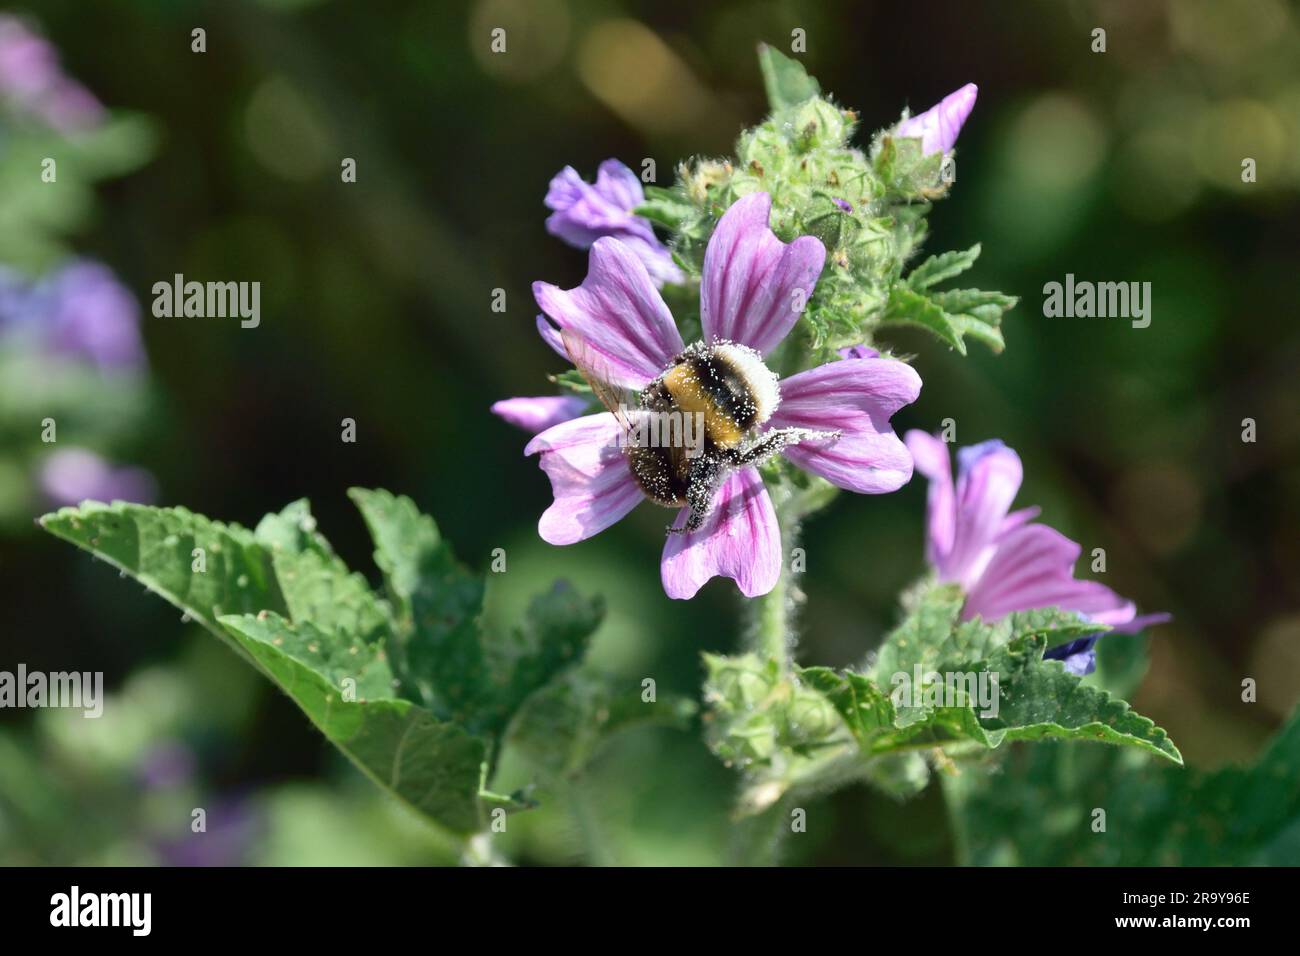 Bee collecting pollen from the flower of a Common Mallow near the River Thames in the London Borough of Newham Stock Photo